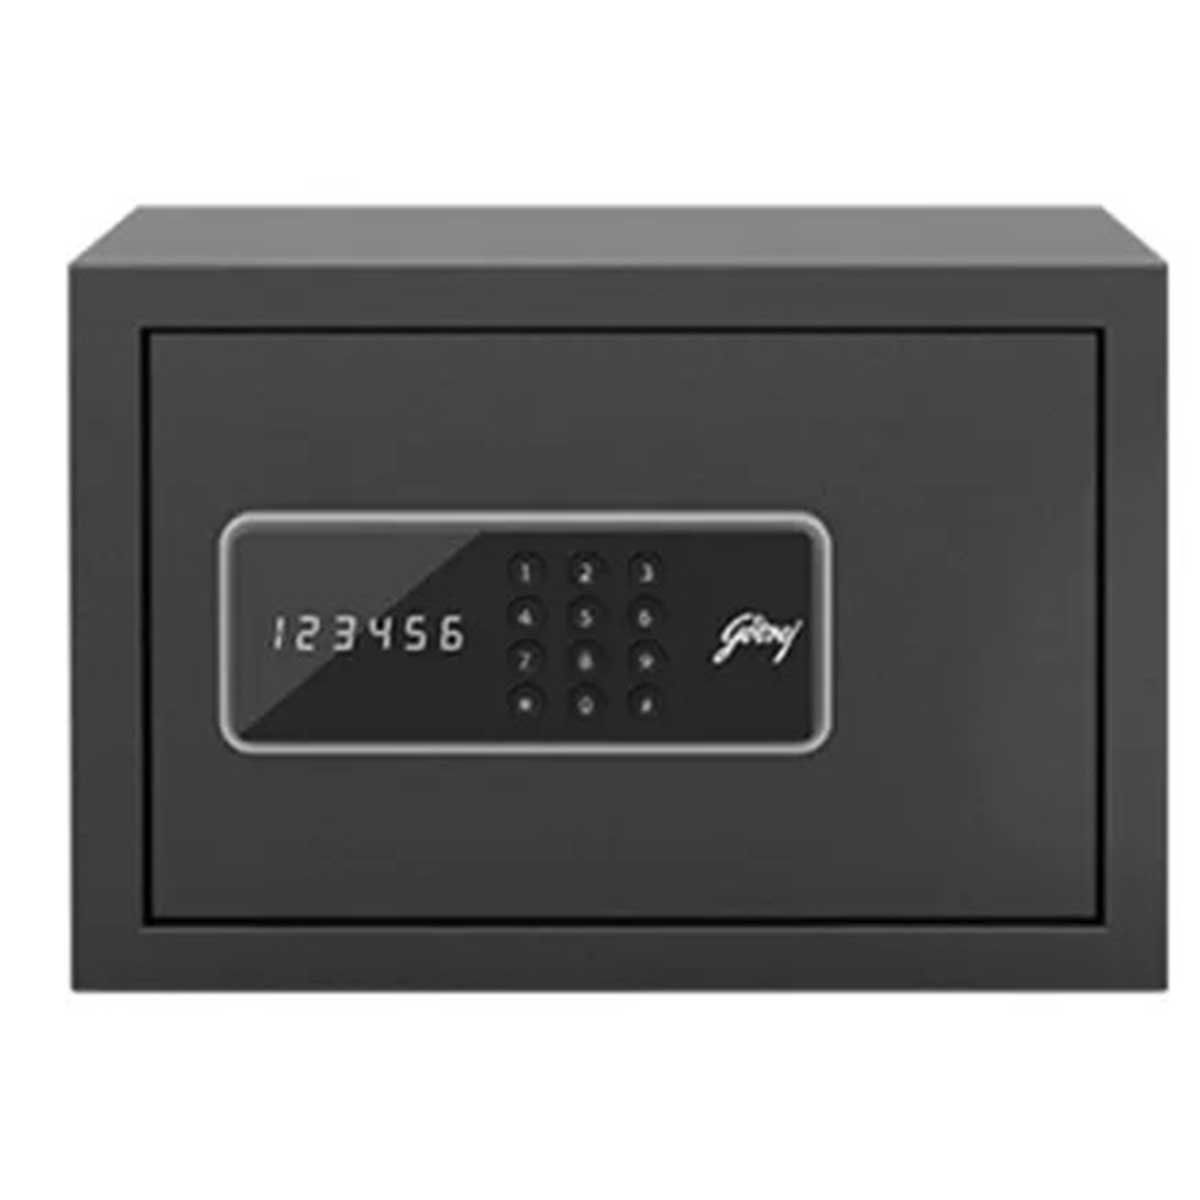 Security Safes Manufacturers, Suppliers in Rohini Sector 7